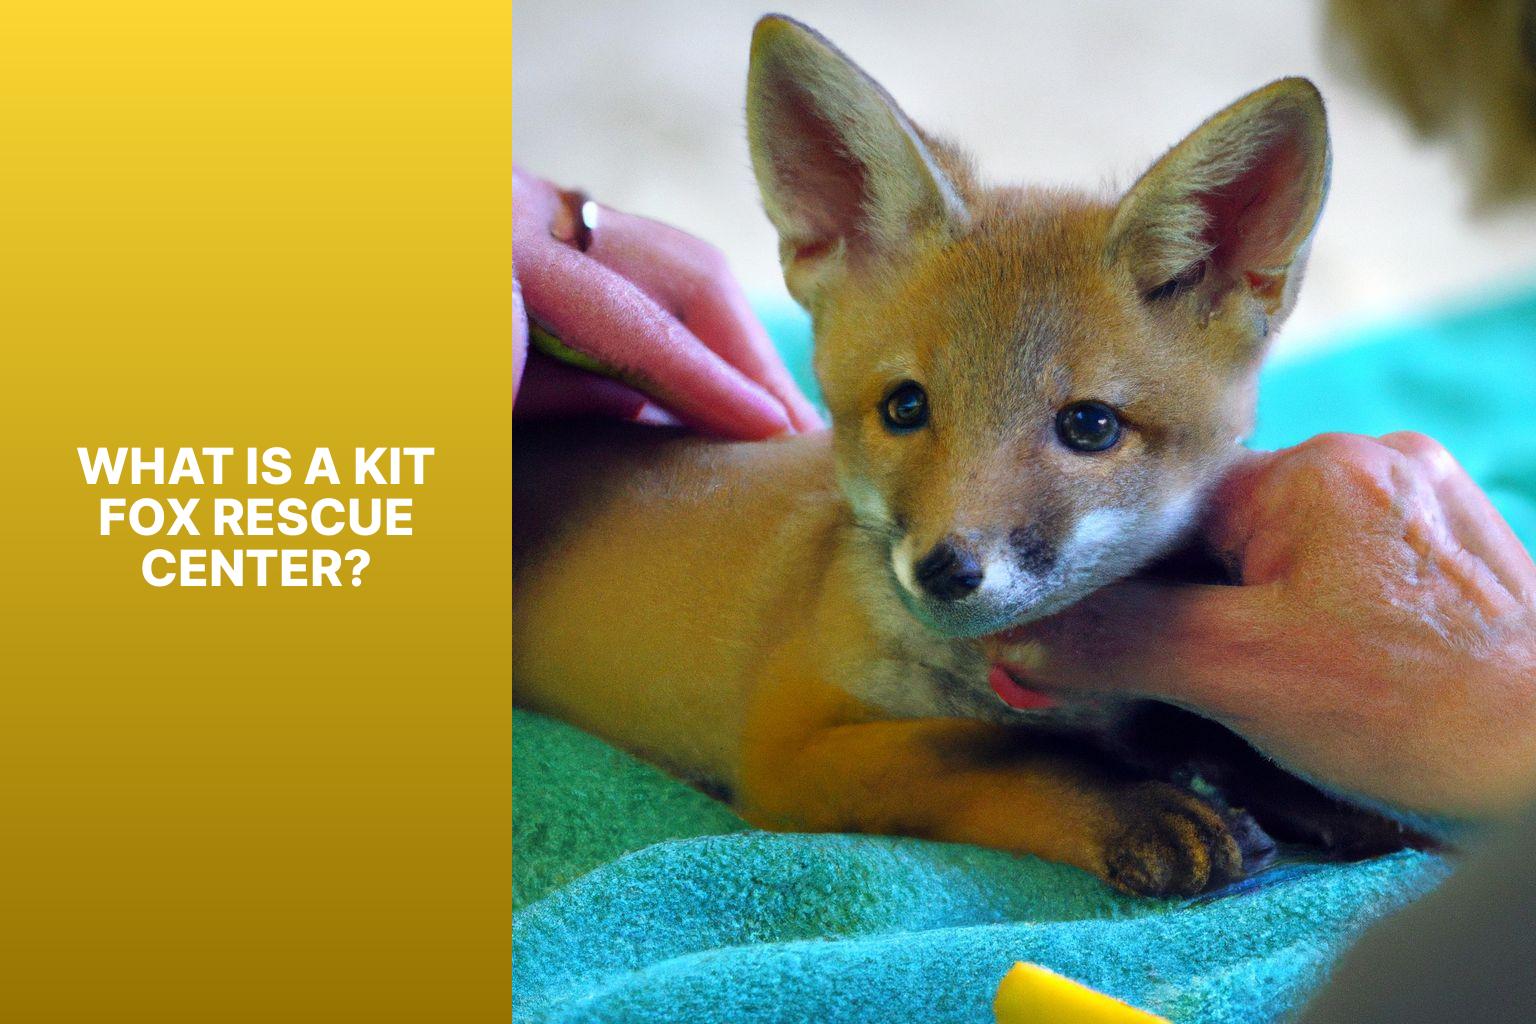 What is a Kit Fox Rescue Center? - Kit Fox Rescue Centers 